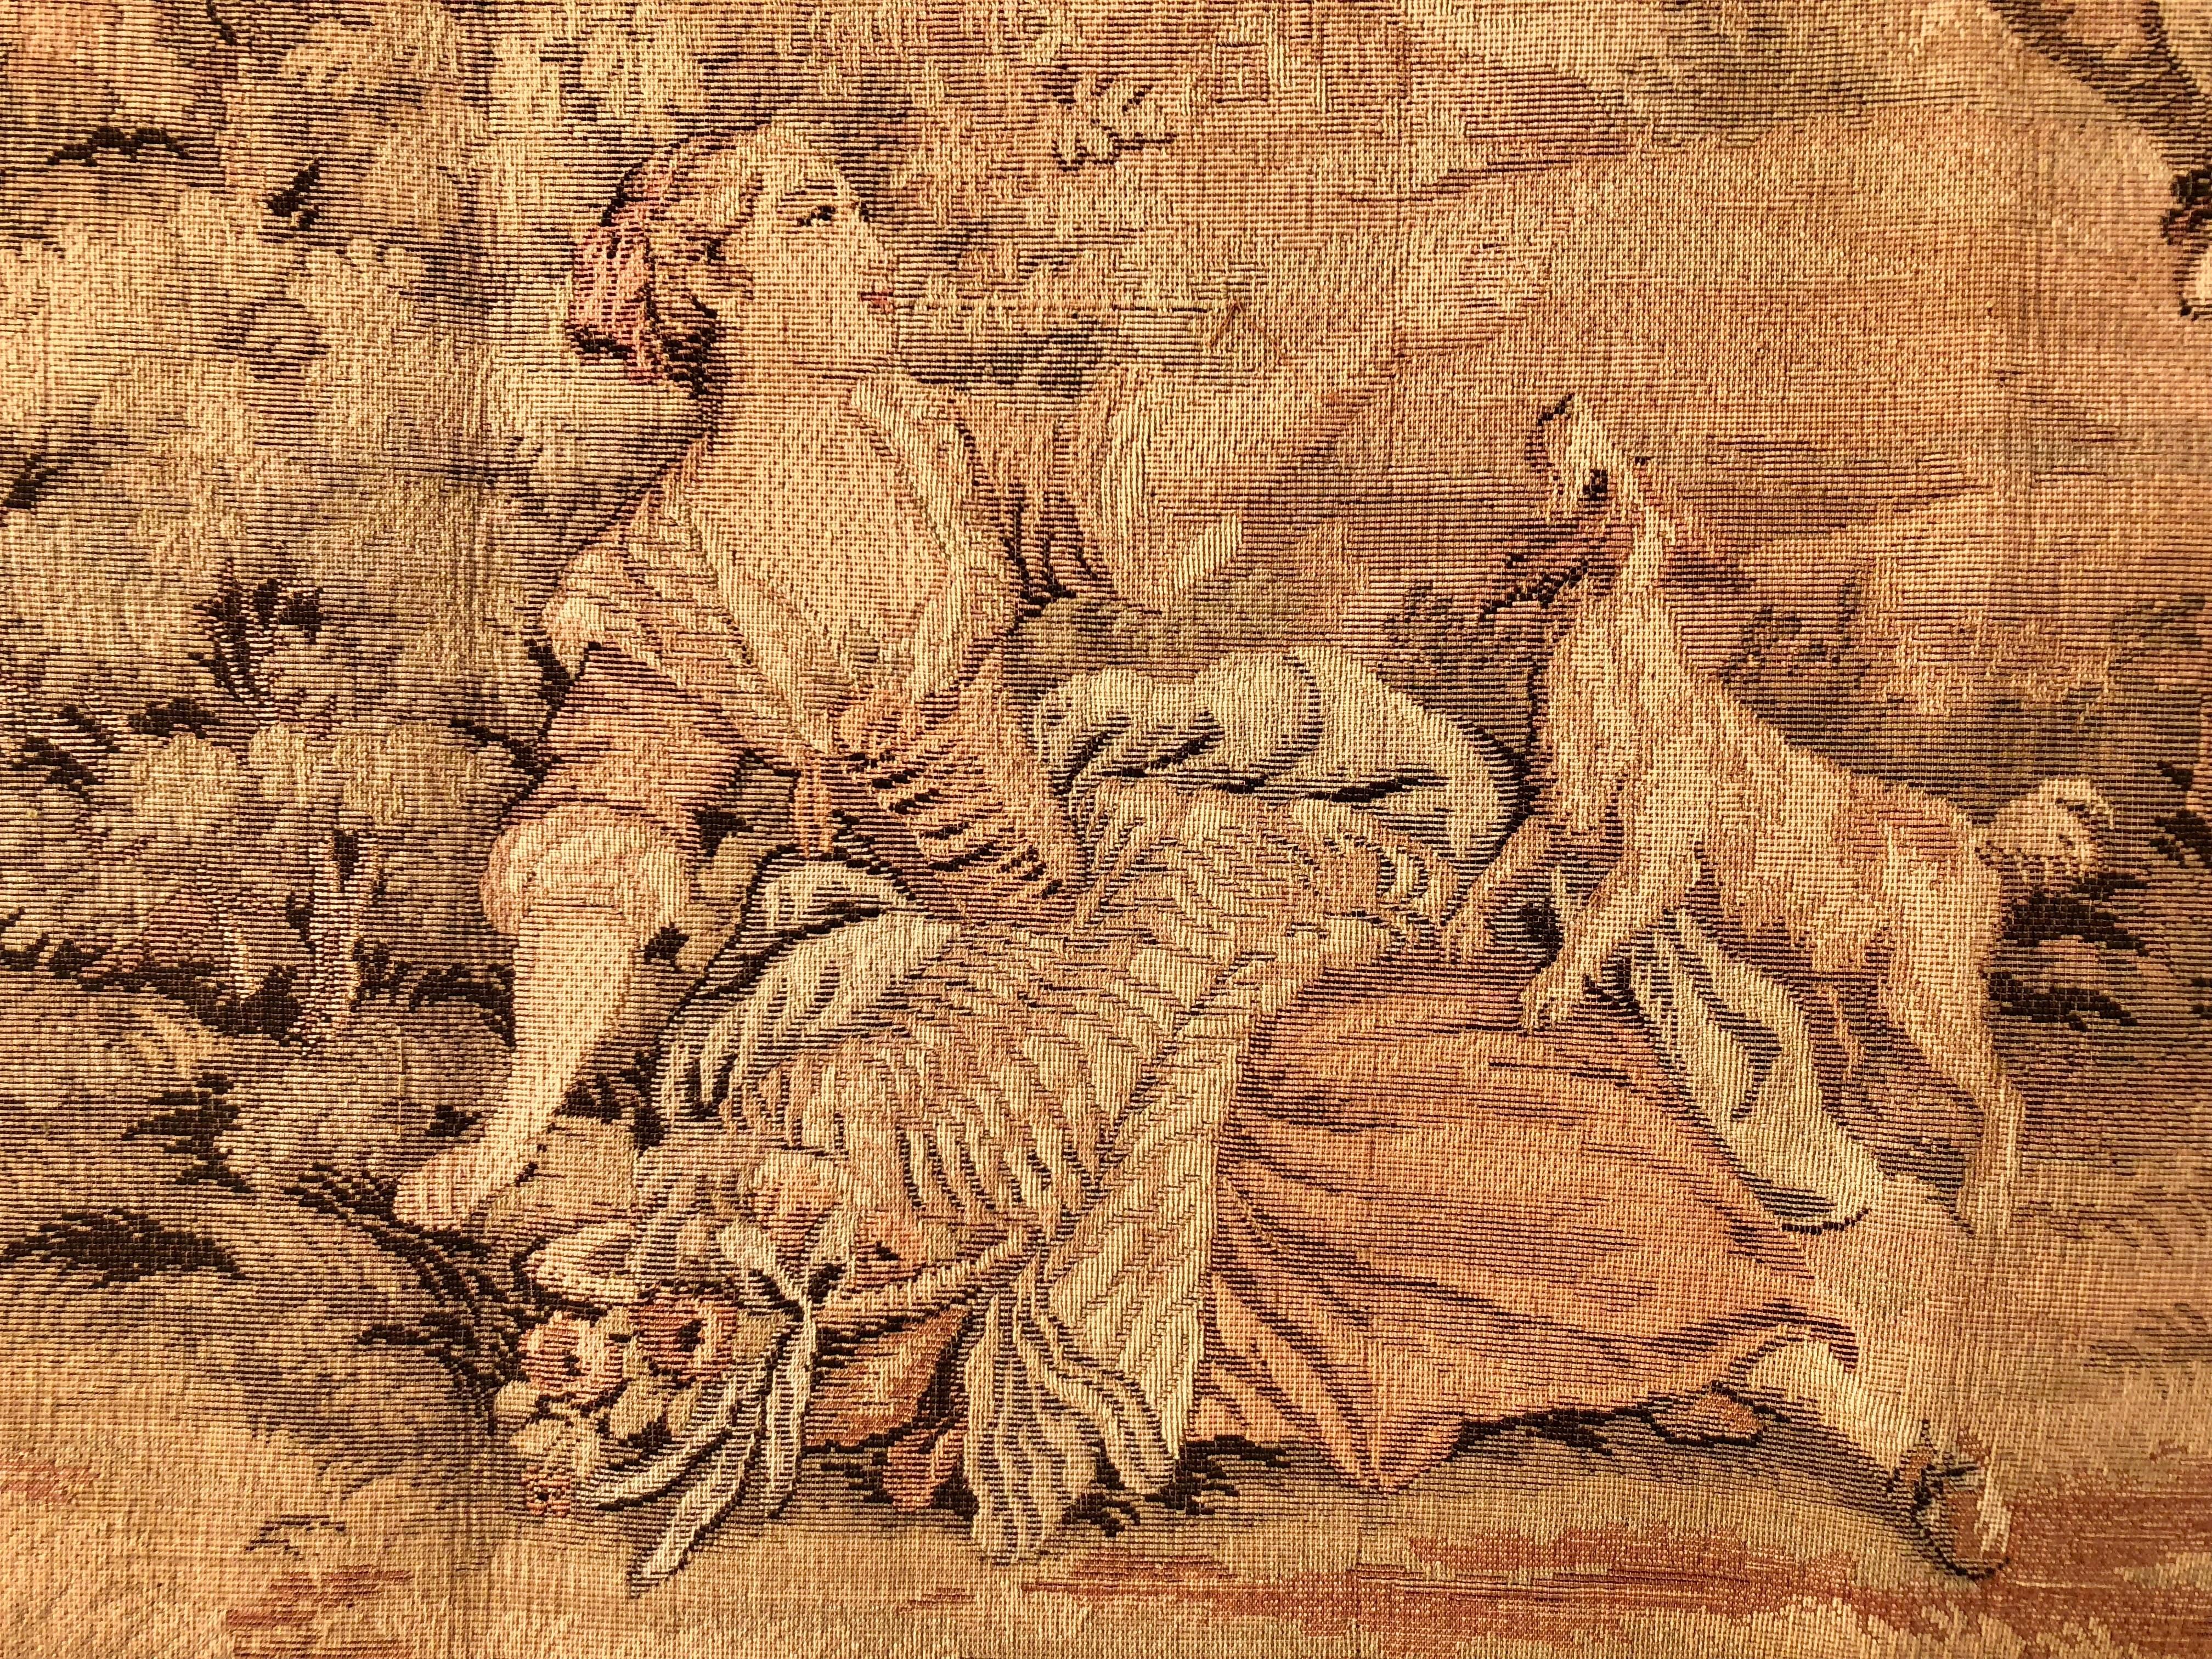 This is a lovely French wall hanging tapestry of a pastoral scene from the 1900s. There is one woman lounging in the yard with her dog while another is on a swing being pushed by a man while a child is sitting on the ground with a dog on his lap.